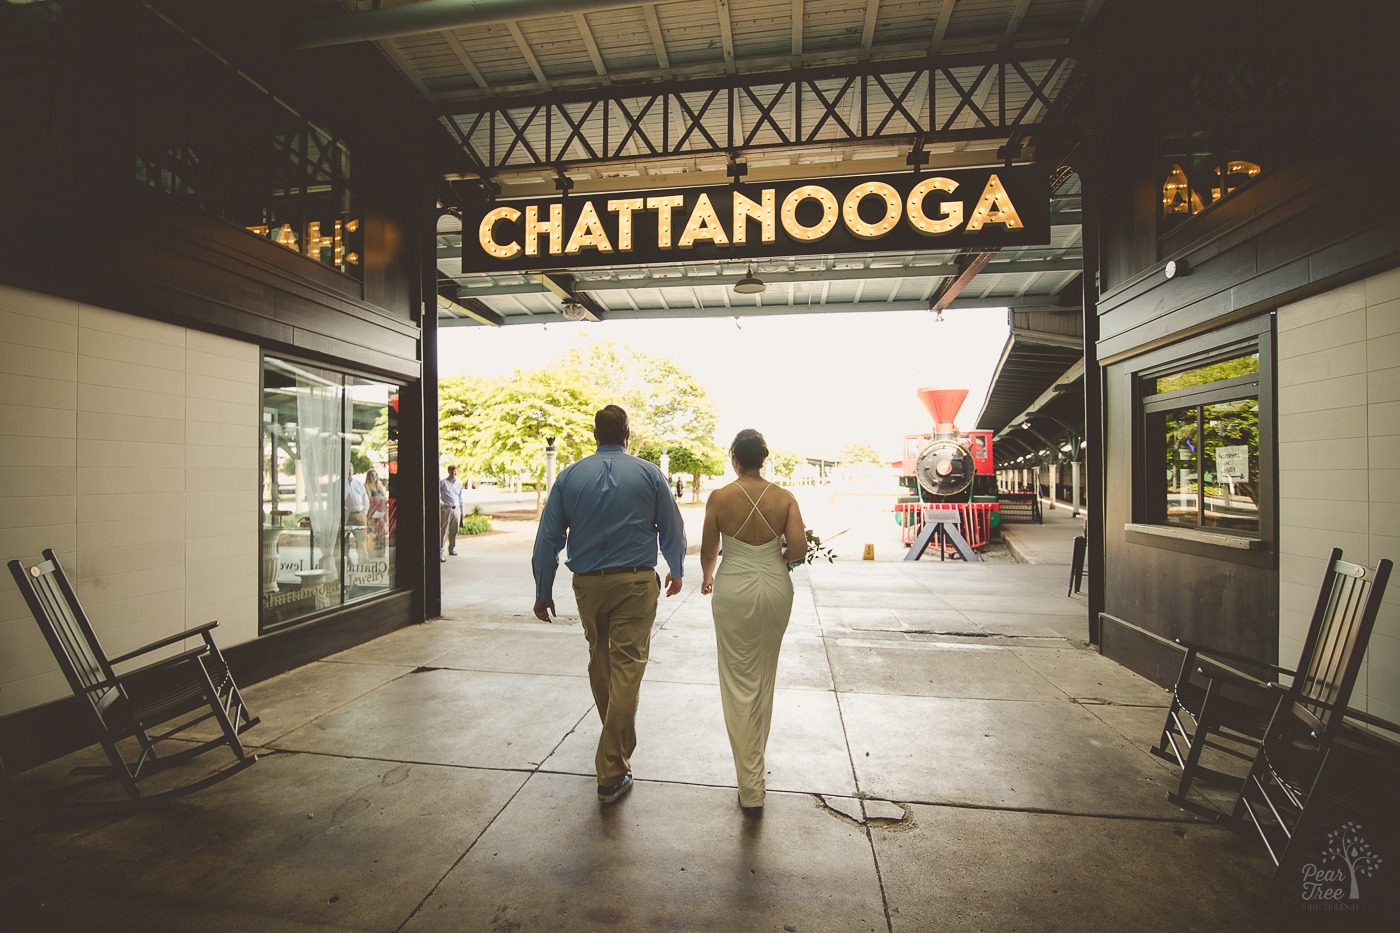 Bride and groom walking side by side under CHATTANOOGA sign at the Chattanooga Choo Choo hotel before their wedding ceremony